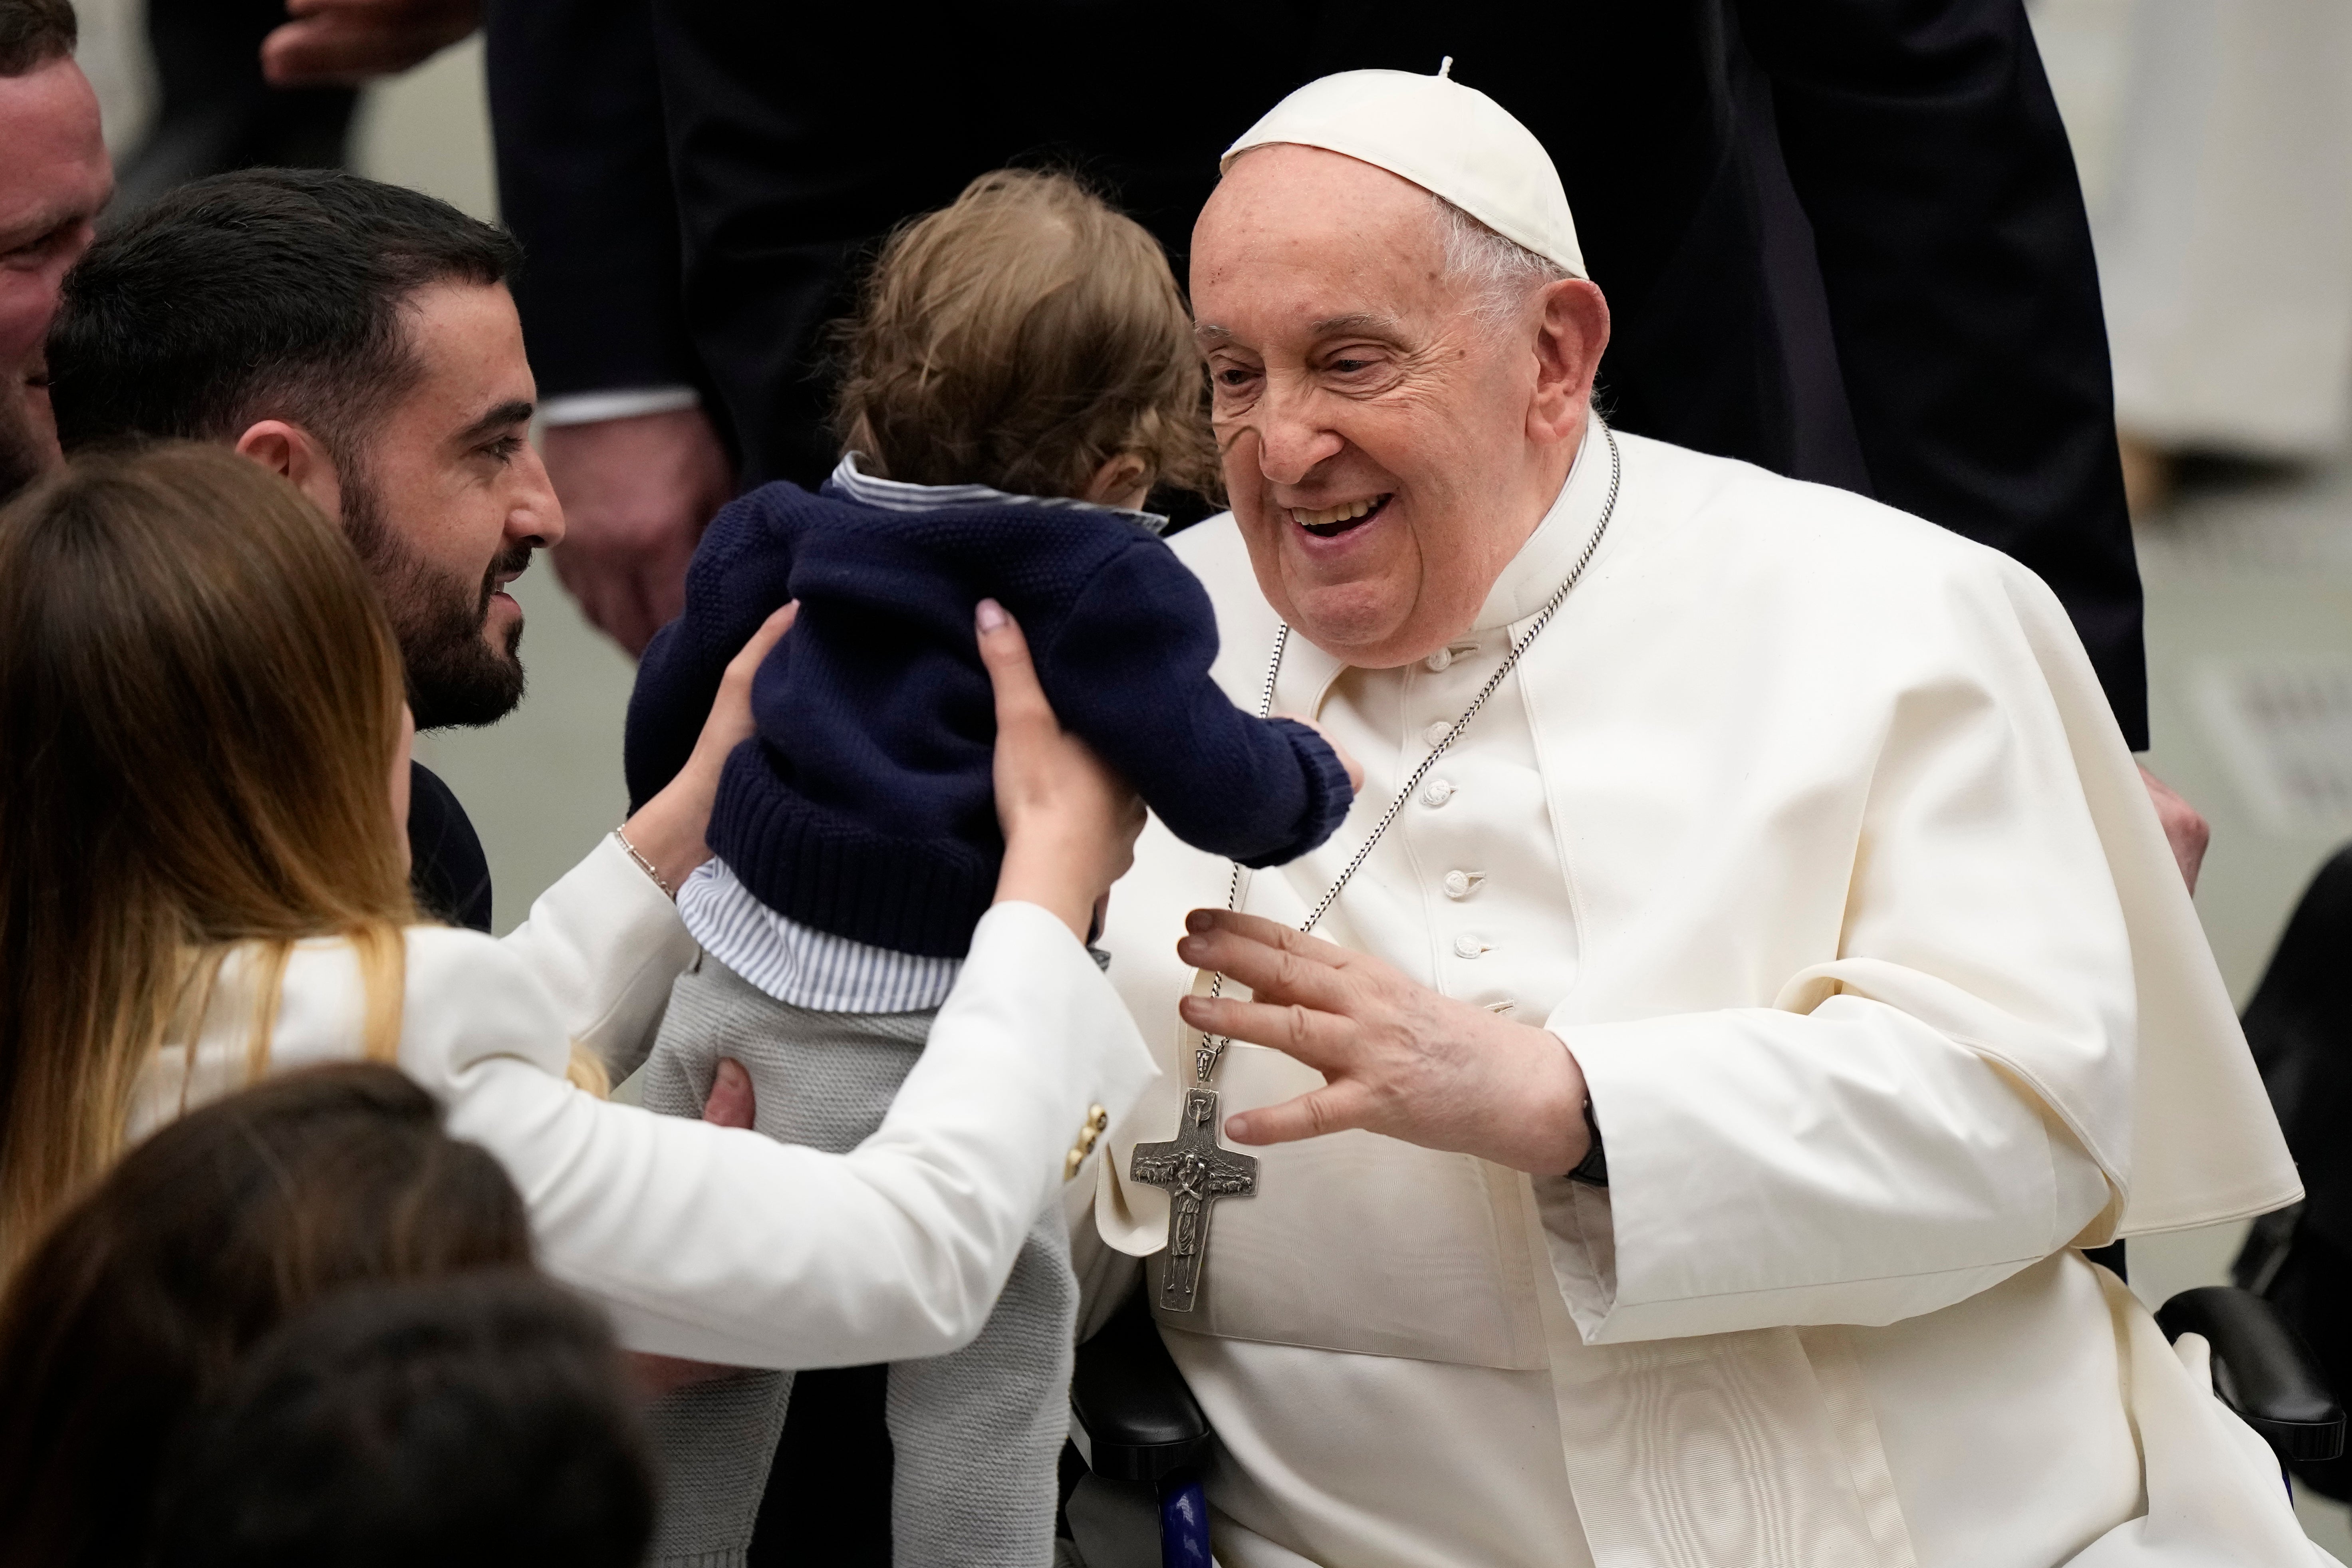 Pope Francis hugs a baby at the end of his weekly general audience in the Paul VI Hall, at the Vatican on Wednesday